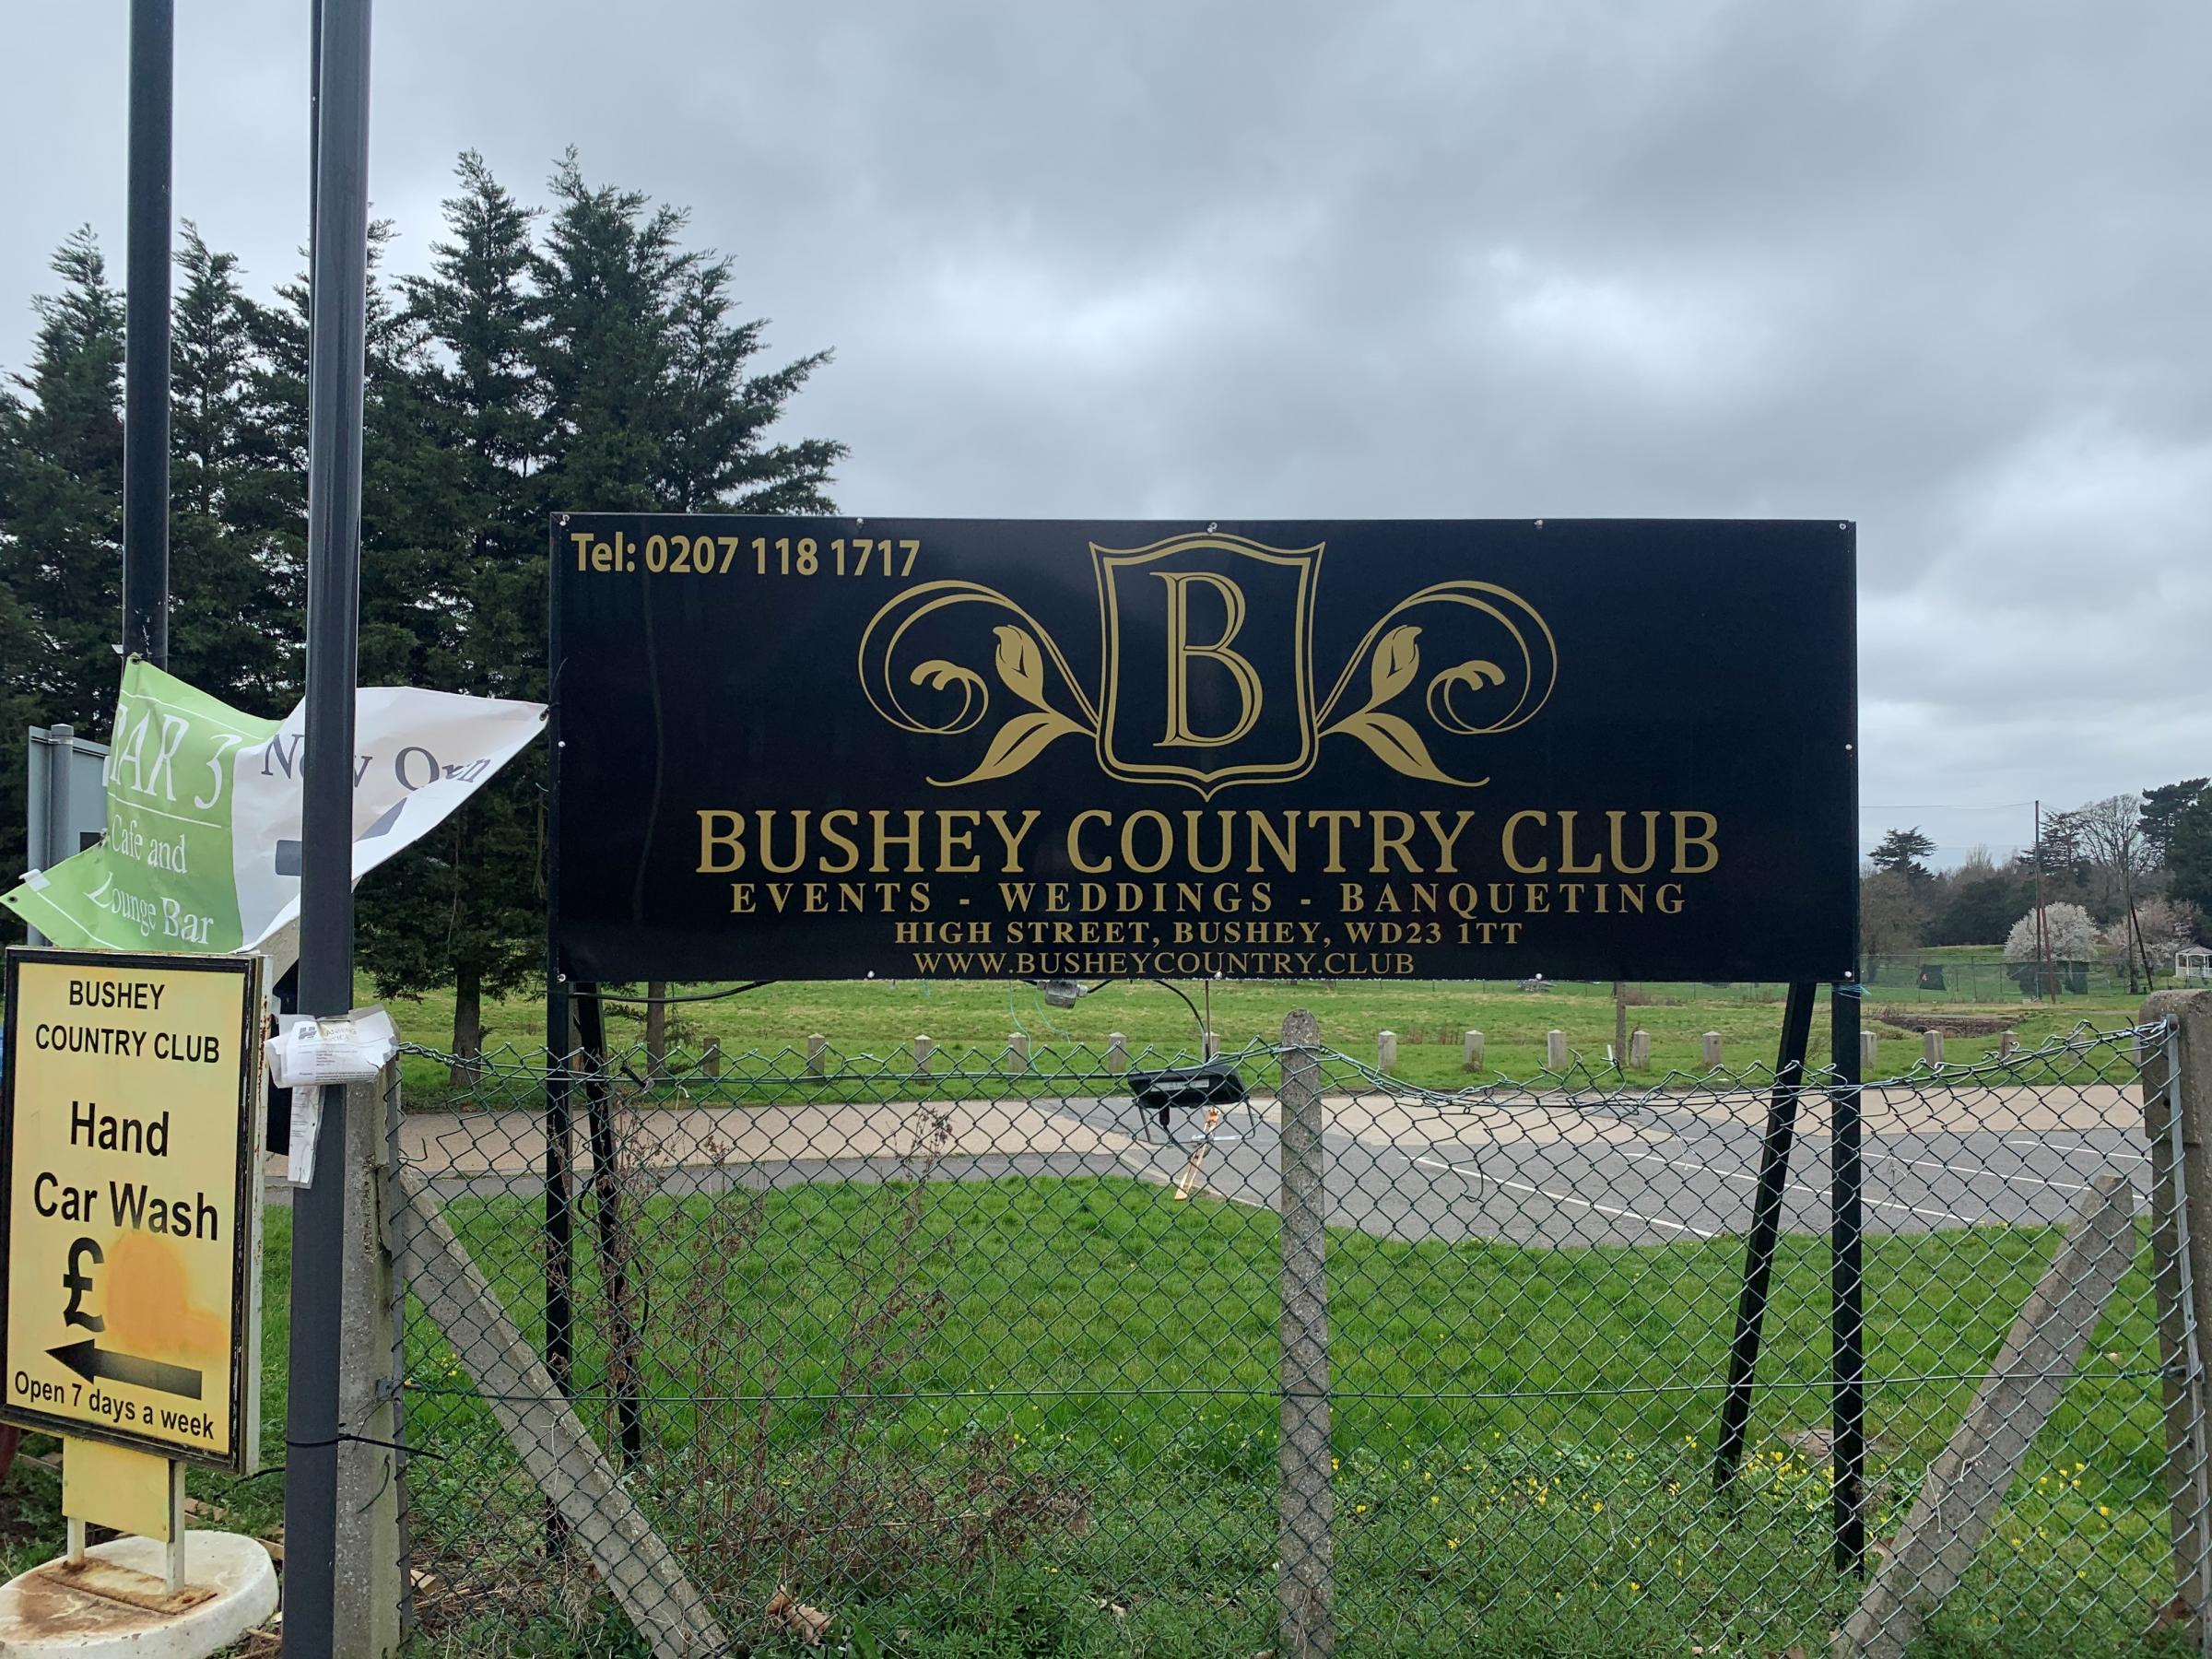 A Bushey Country Club sign by the entrance to the site